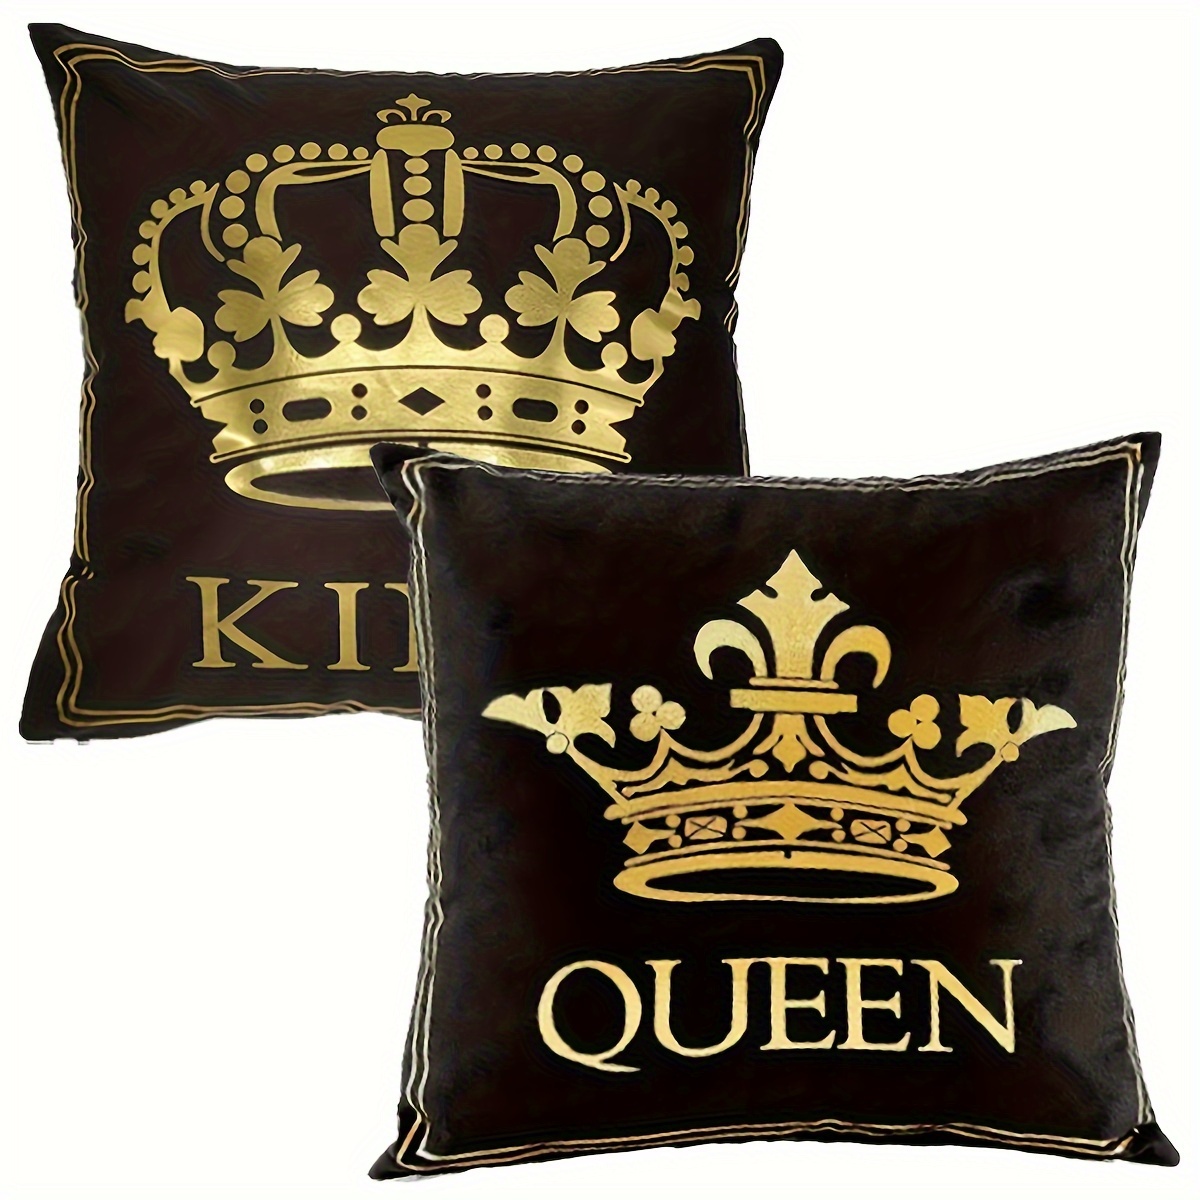 

2pcs Modern Gold Stamping Crown Throw Pillow Covers, 18*18inch Home Decorative King And Queen Cushion Cases For Couch Sofa Bedroom, Farmhouse Style, Black, Without Pillow Inserts